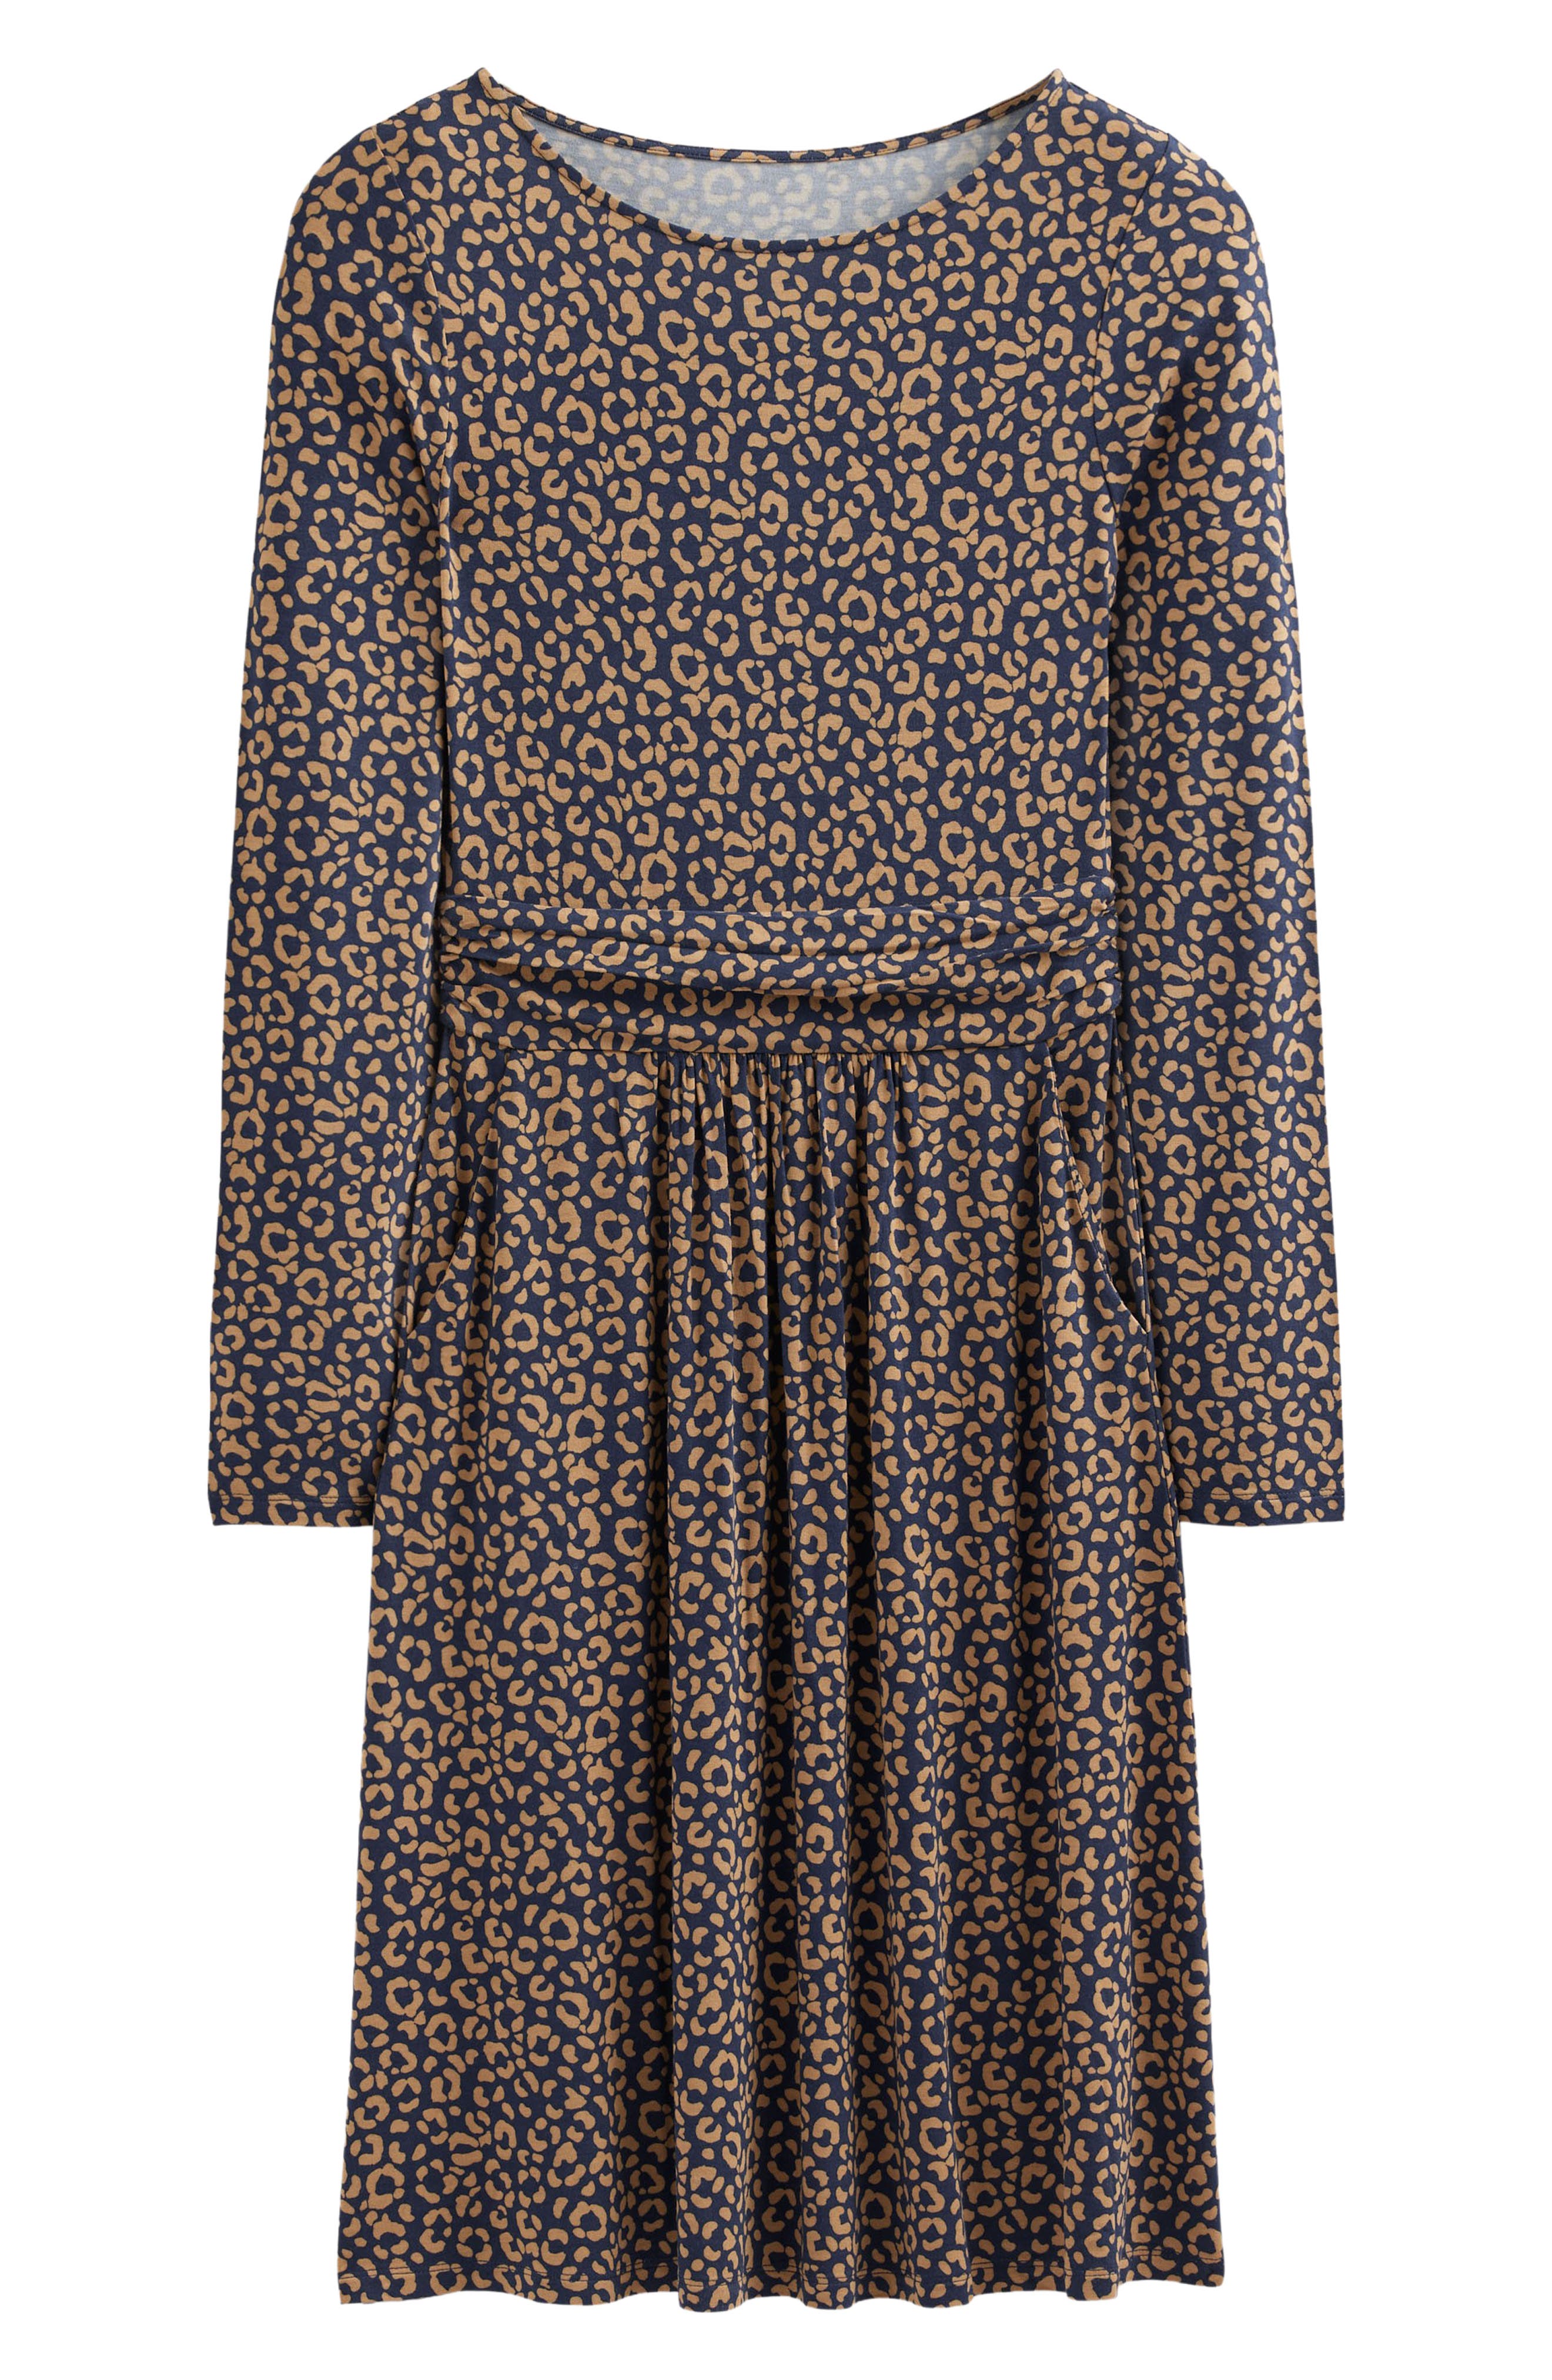 Boden Abigail Long Sleeve Jersey Dress in Camel Animal Stamp